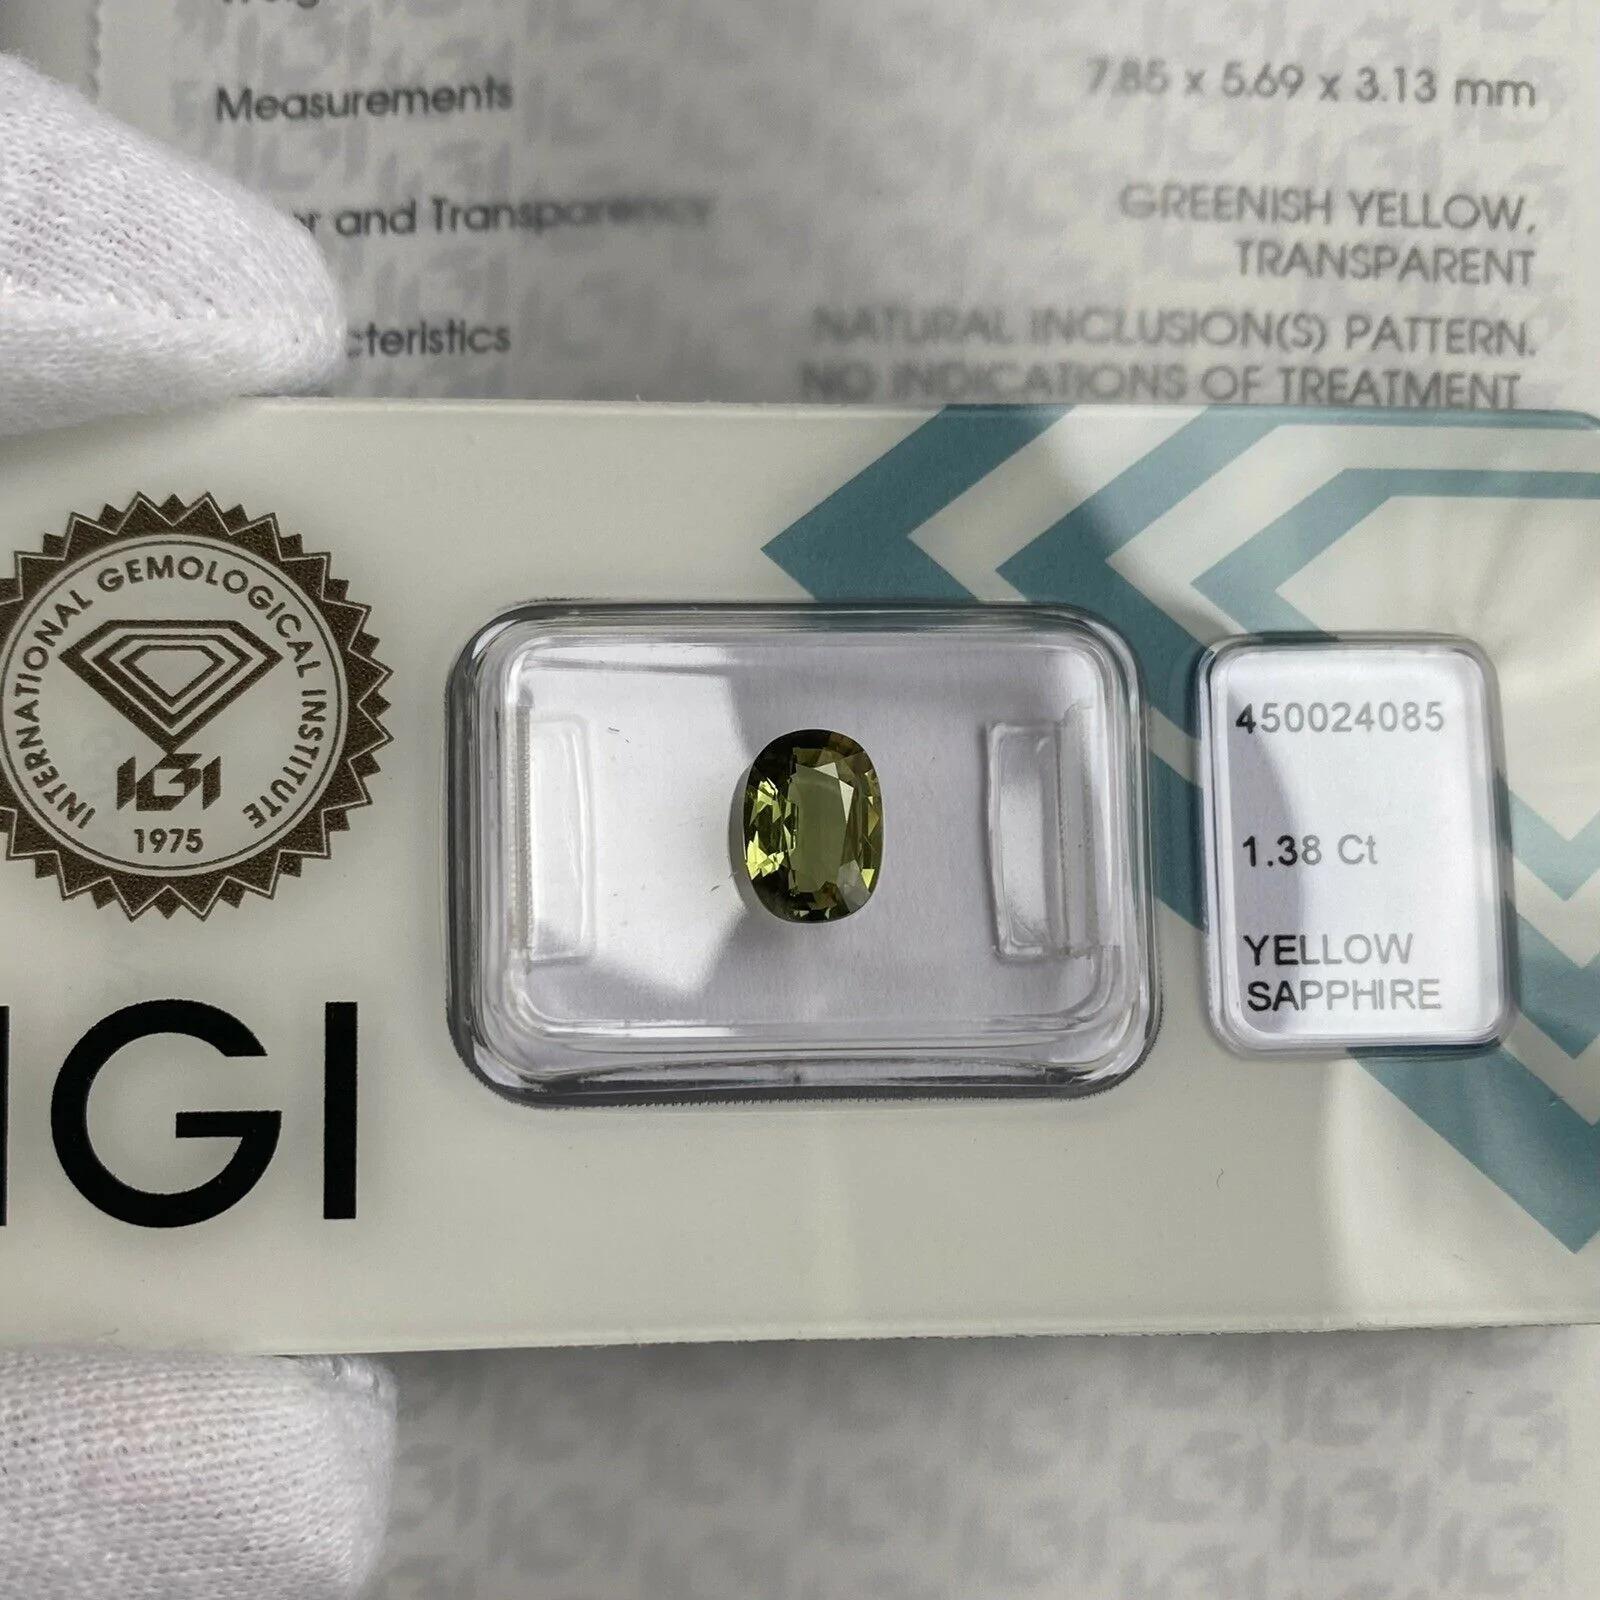 Vivid Green Yellow Sapphire 1.38ct Untreated Rare IGI Certified Oval Cut Blister

Vivid Greenish Yellow Sapphire In IGI Blister. 
1.38 Carat with a very good oval cut and good clarity, clean stone with only some small natural inclusions visible when